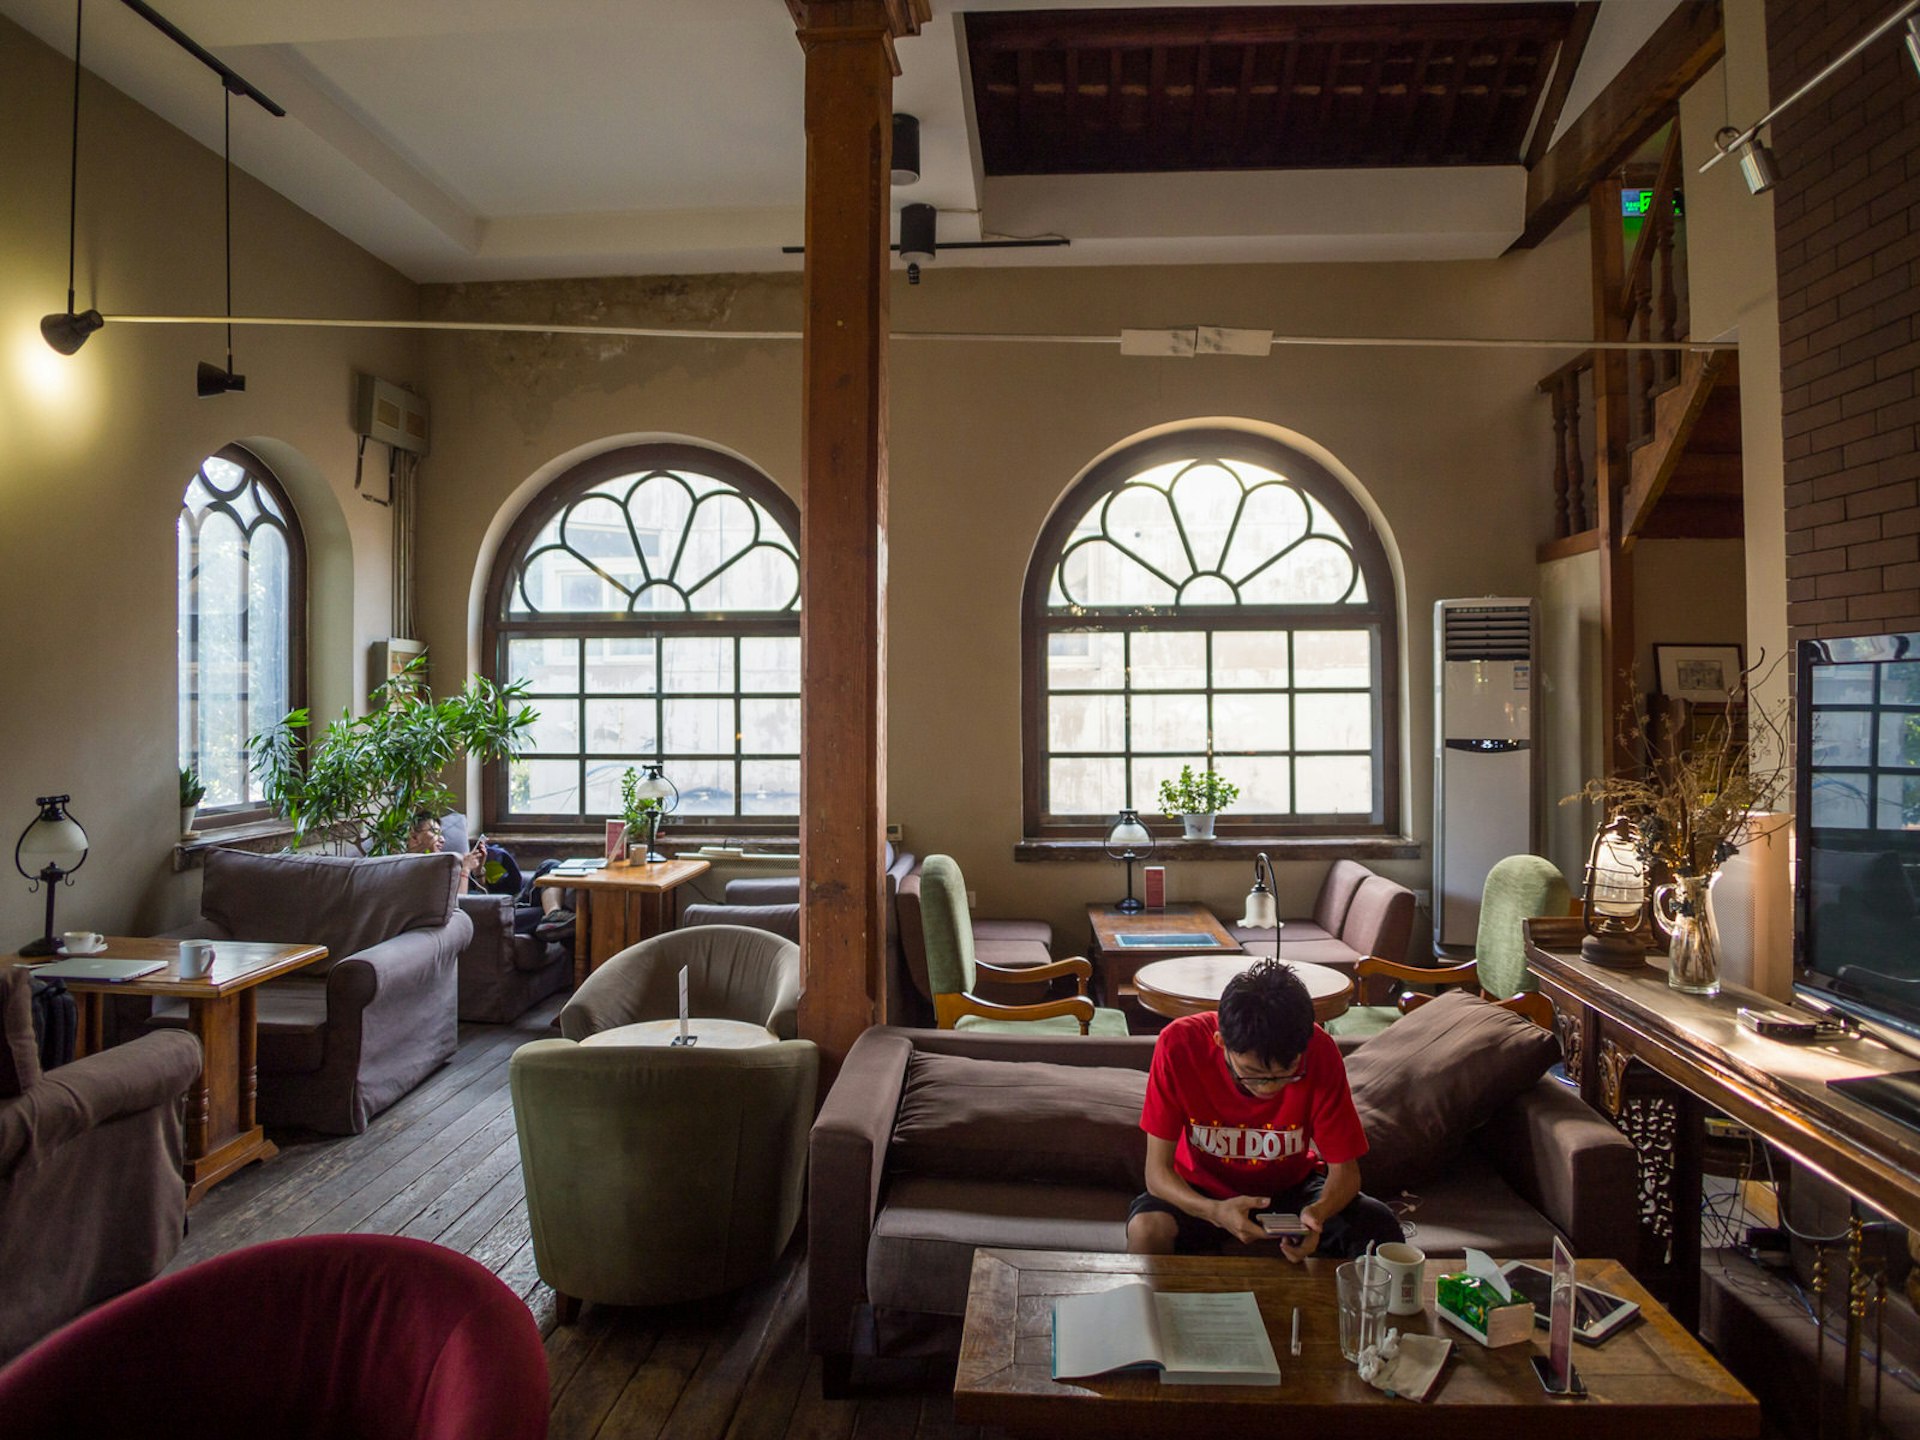 Laid-back atmosphere at 1901 Cafe © Tom O'Malley / Lonely Planet